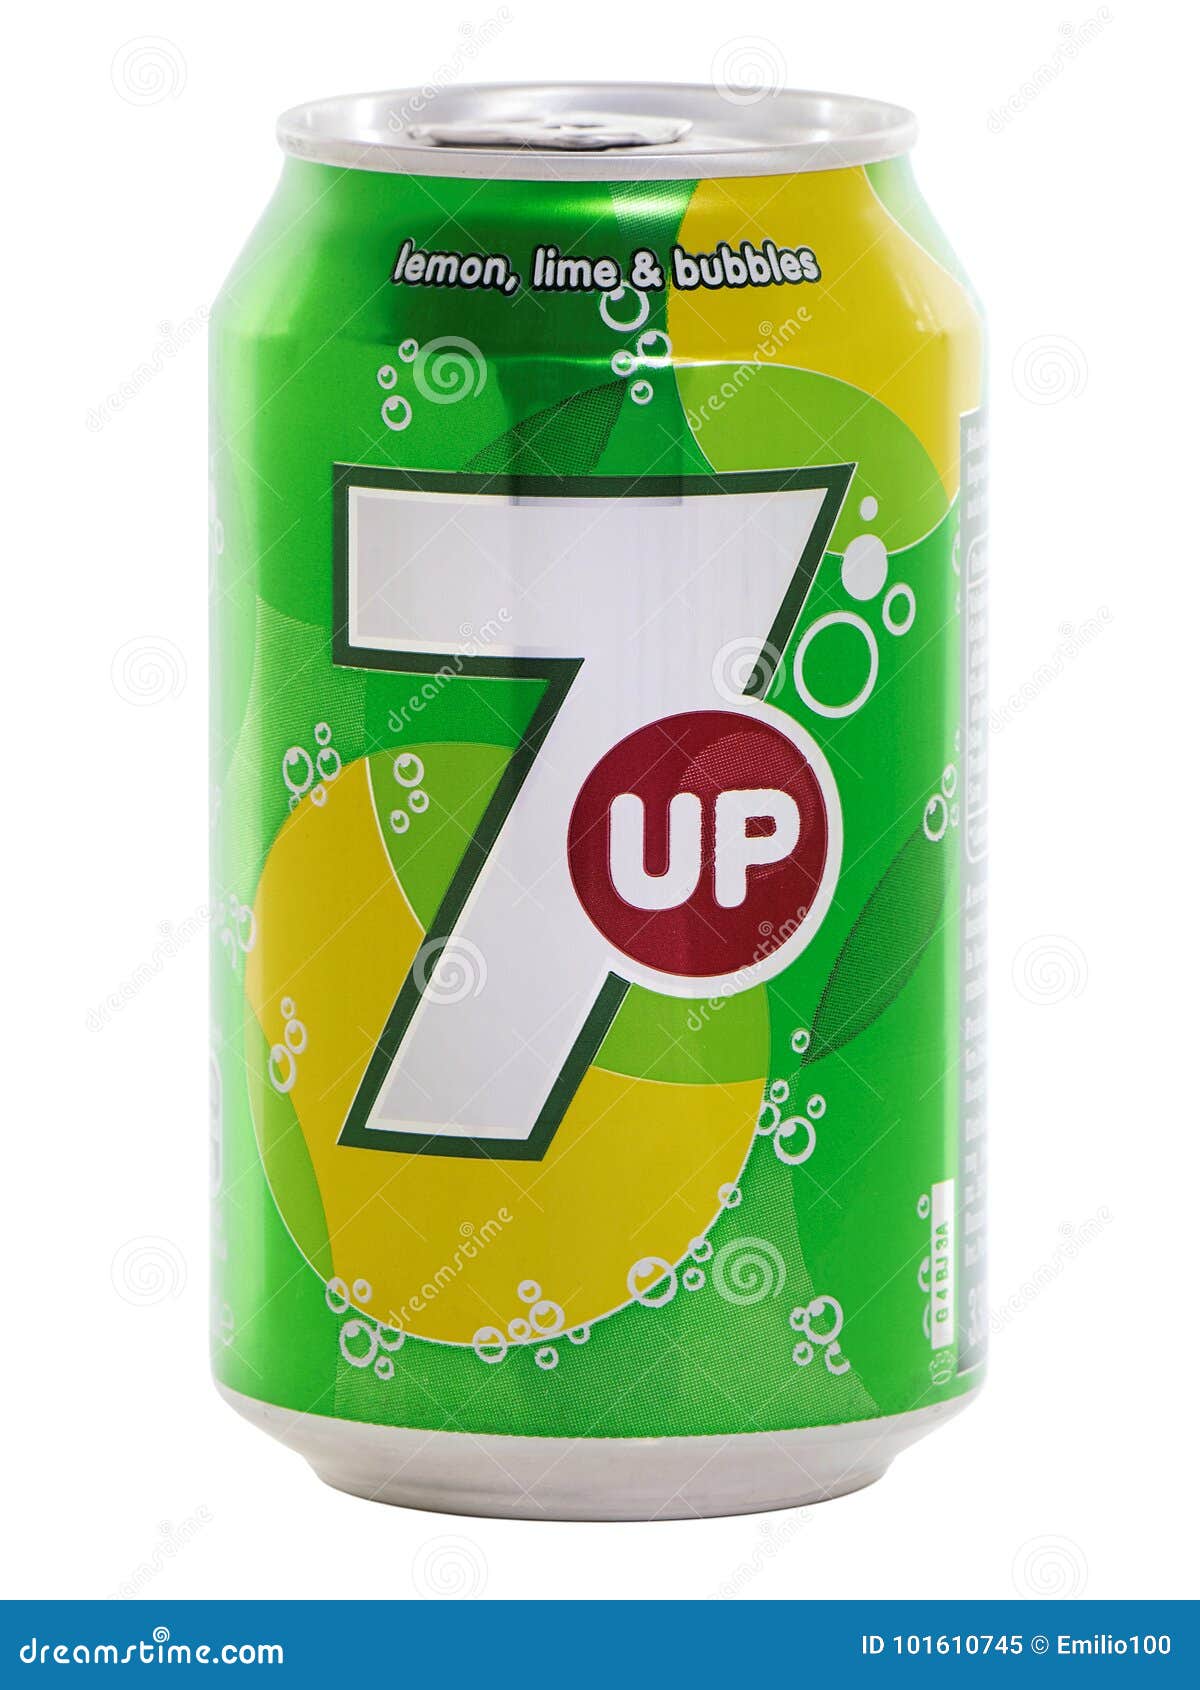 698 7up Drink Images, Stock Photos, 3D objects, & Vectors